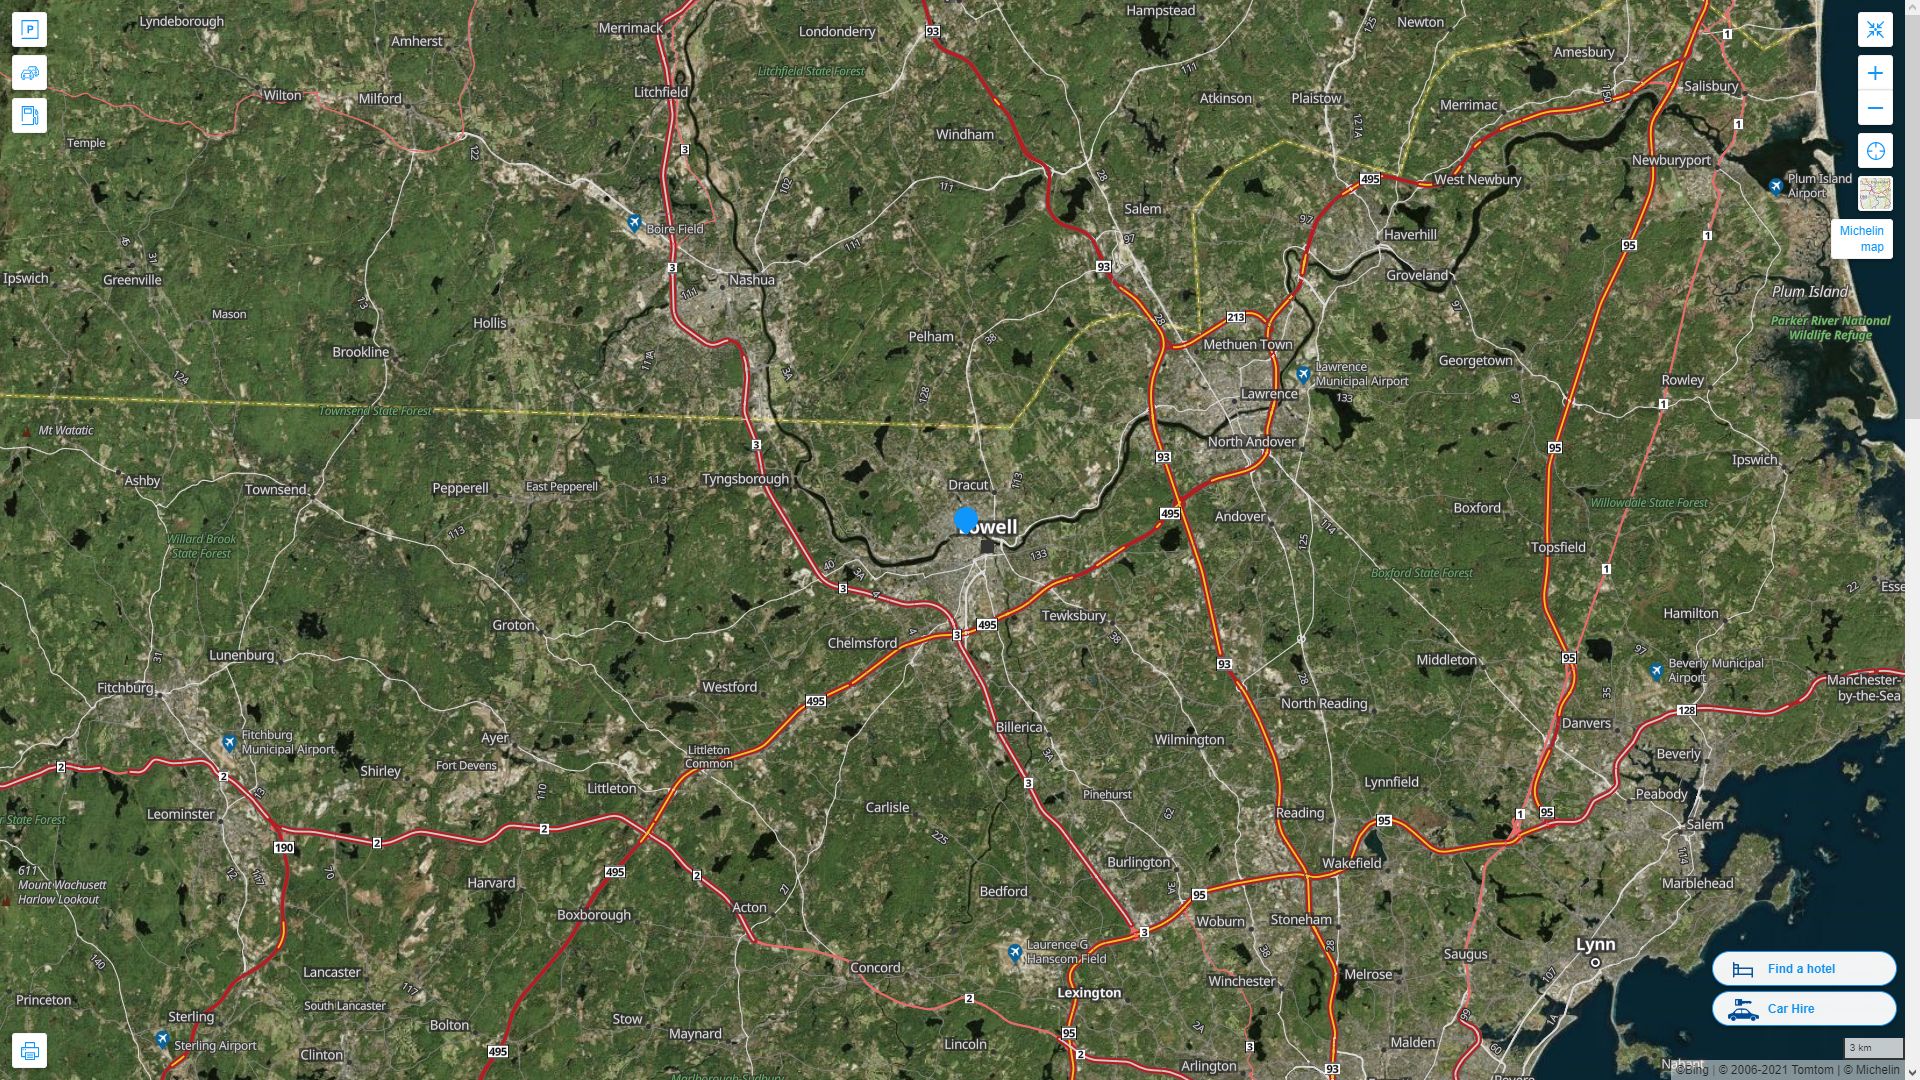 Lowell Massachusetts Highway and Road Map with Satellite View